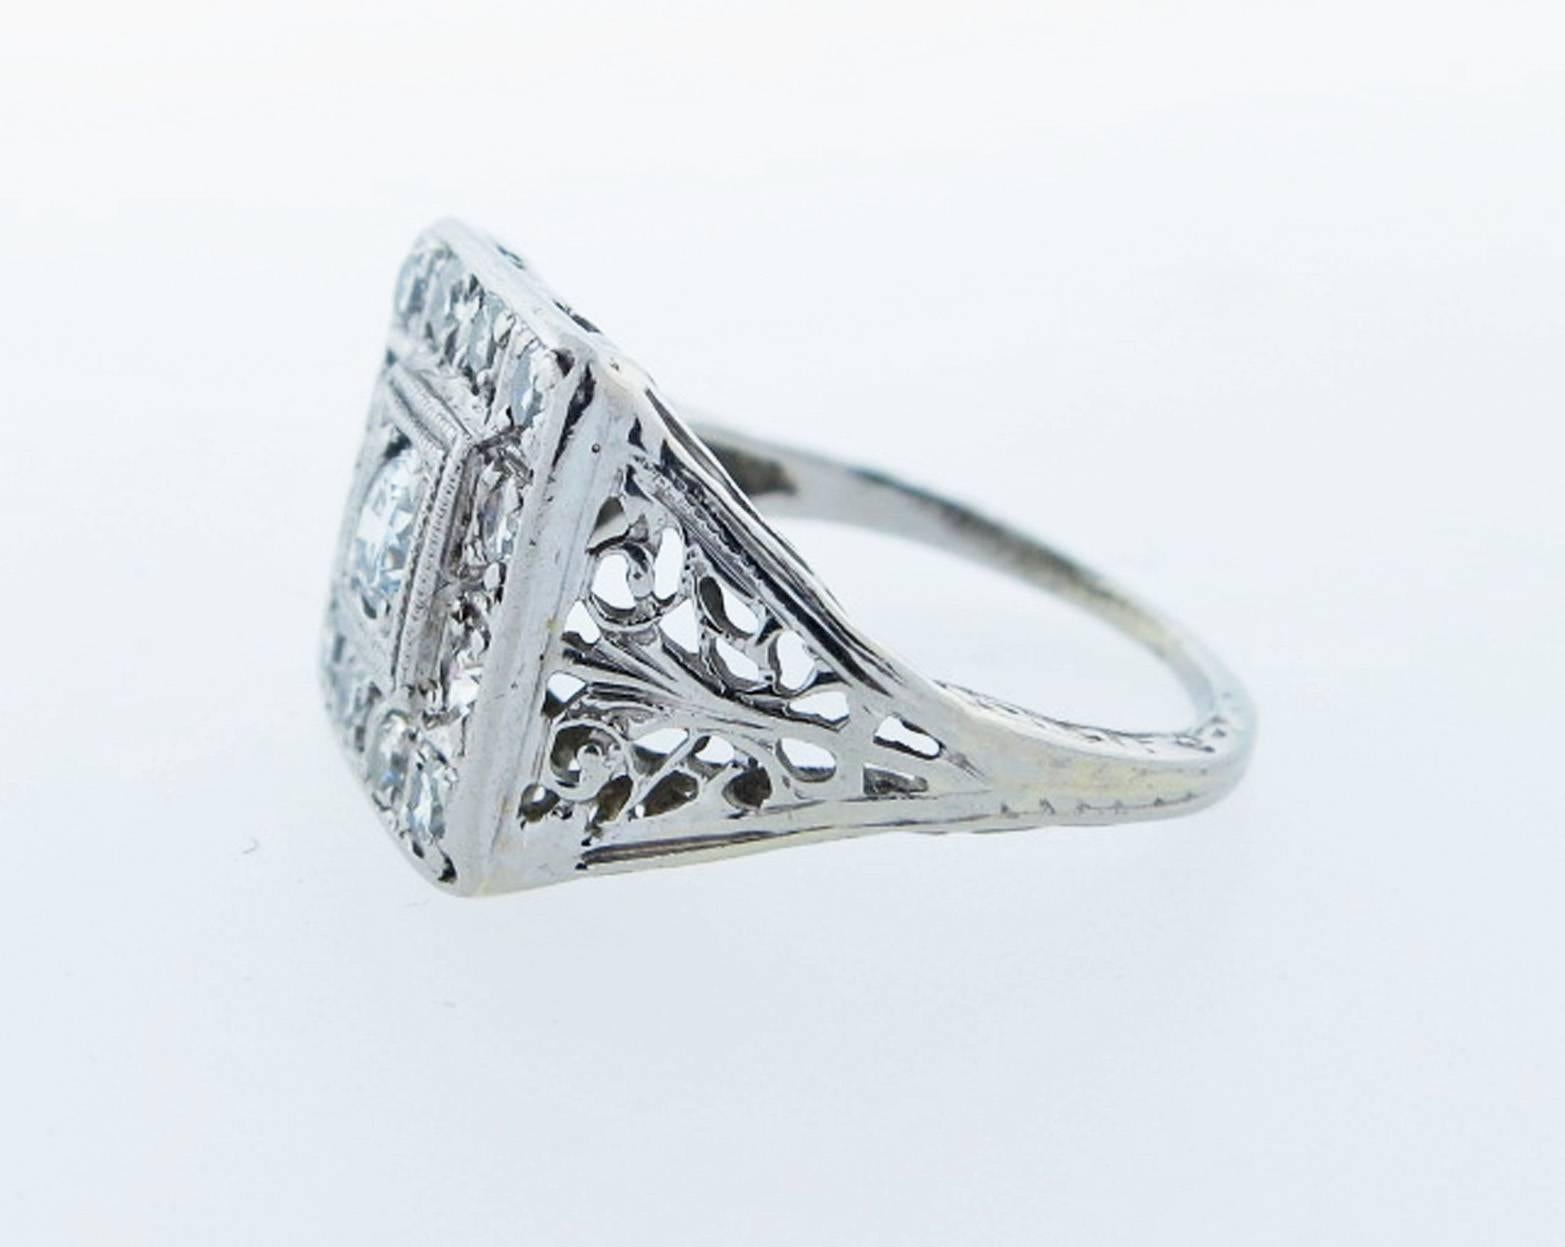 Lovely detail 18kt. white gold ring set with a center round European cut diamond weighing approx .15cts surrounded with twelve single cut diamonds totaling .25cts. Size 4 and can be sized circa 1920.